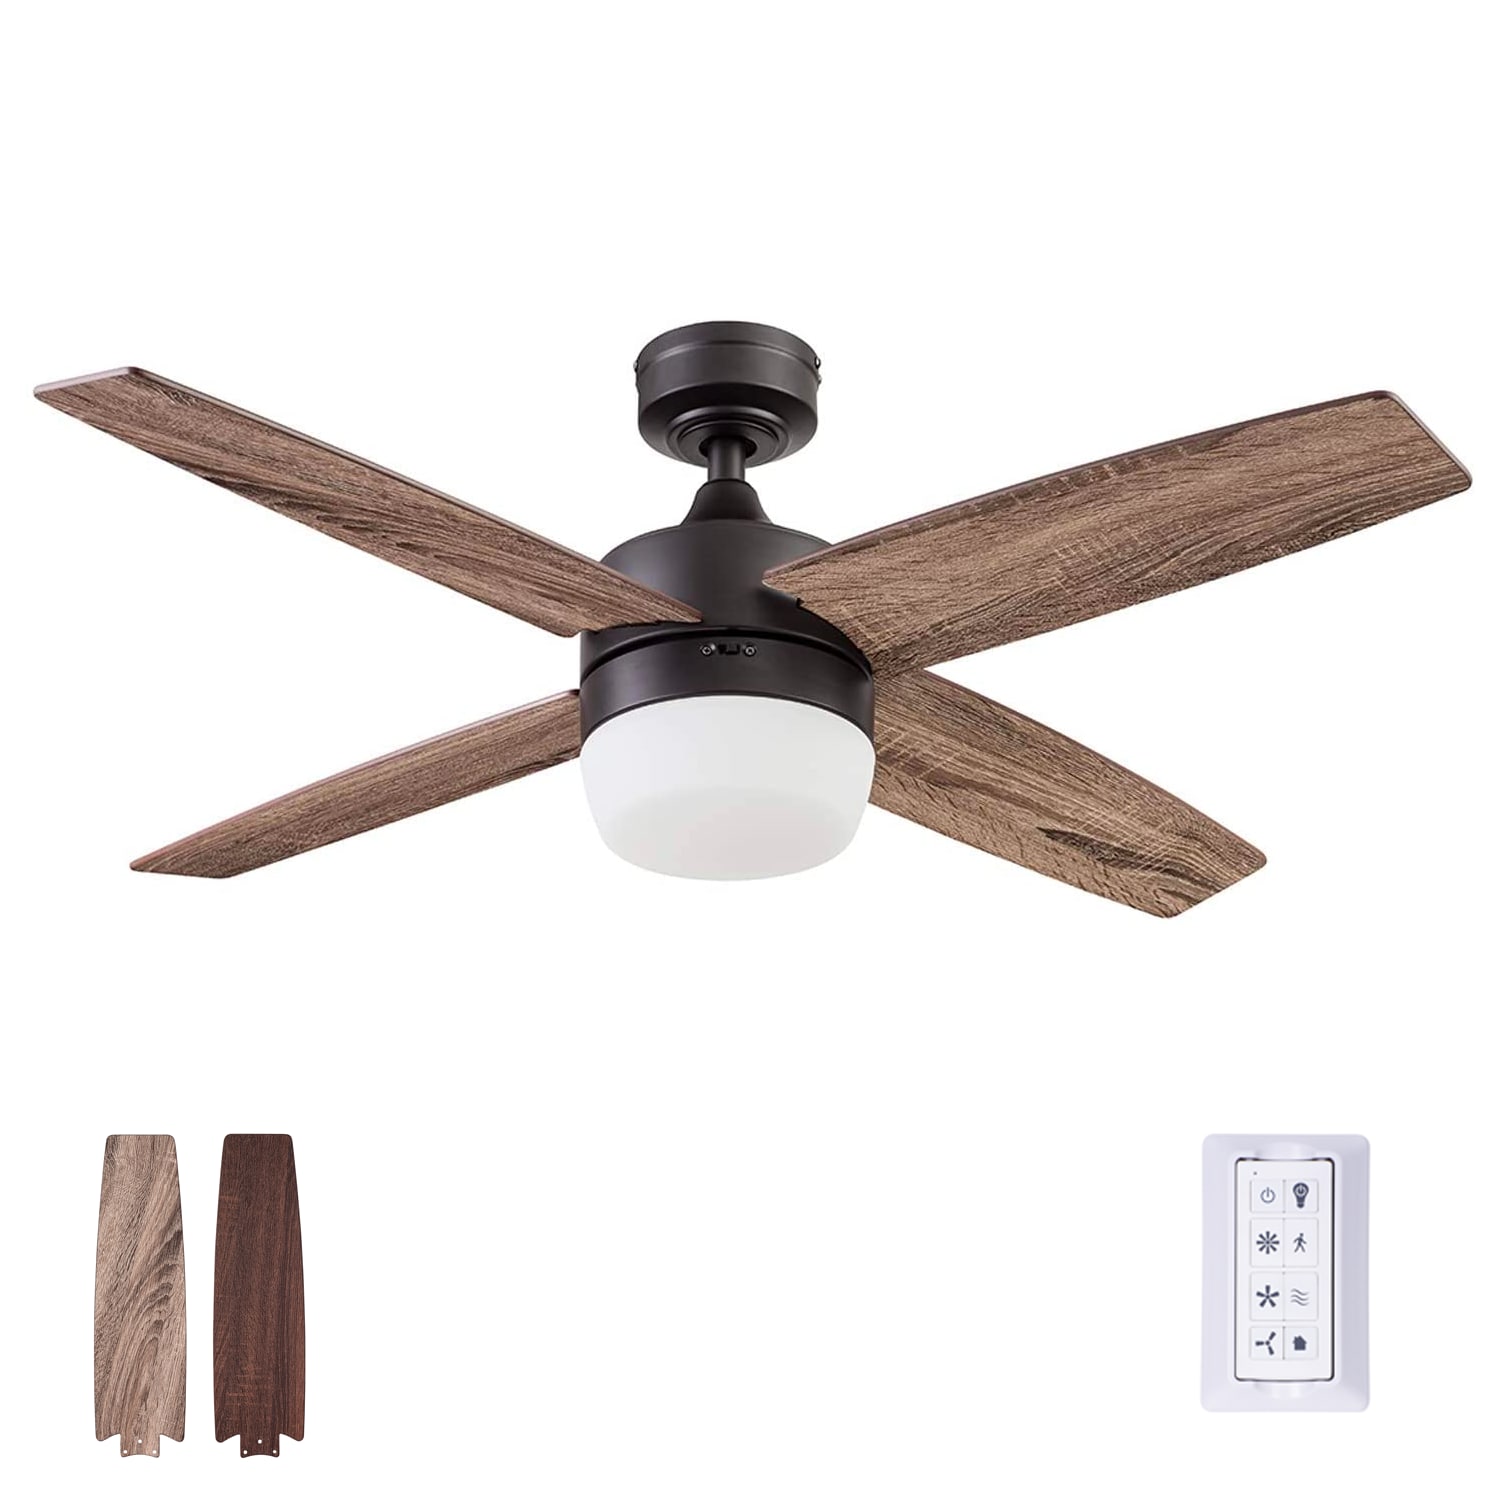 Prominence Home Atlas 44-in Bronze Indoor Ceiling Fan with Light